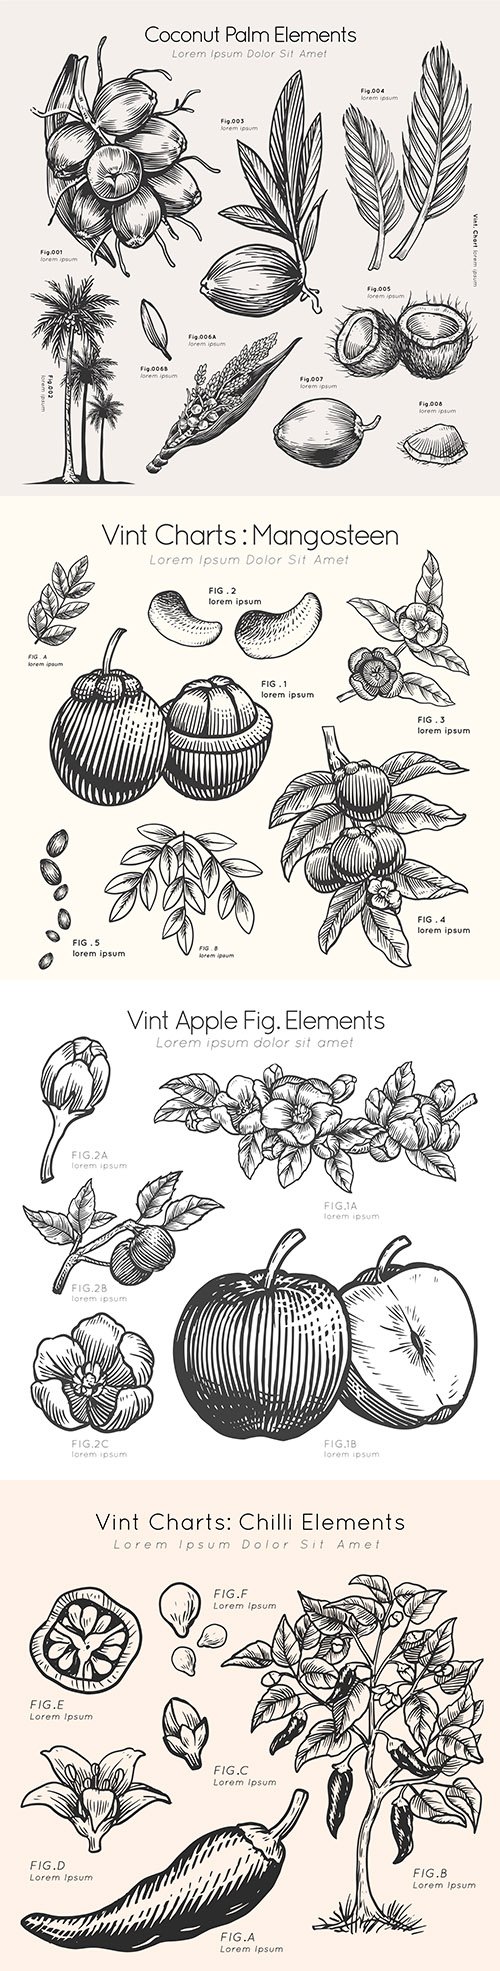 Fruit and vegetables drawn by hand and description